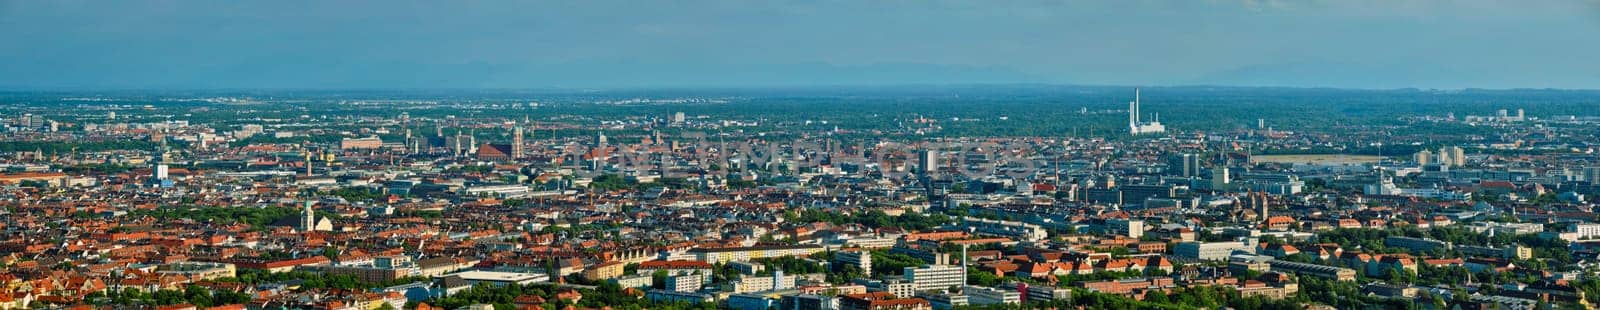 Aerial panorama of Munich center from Olympiaturm (Olympic Tower). Munich, Bavaria, Germany